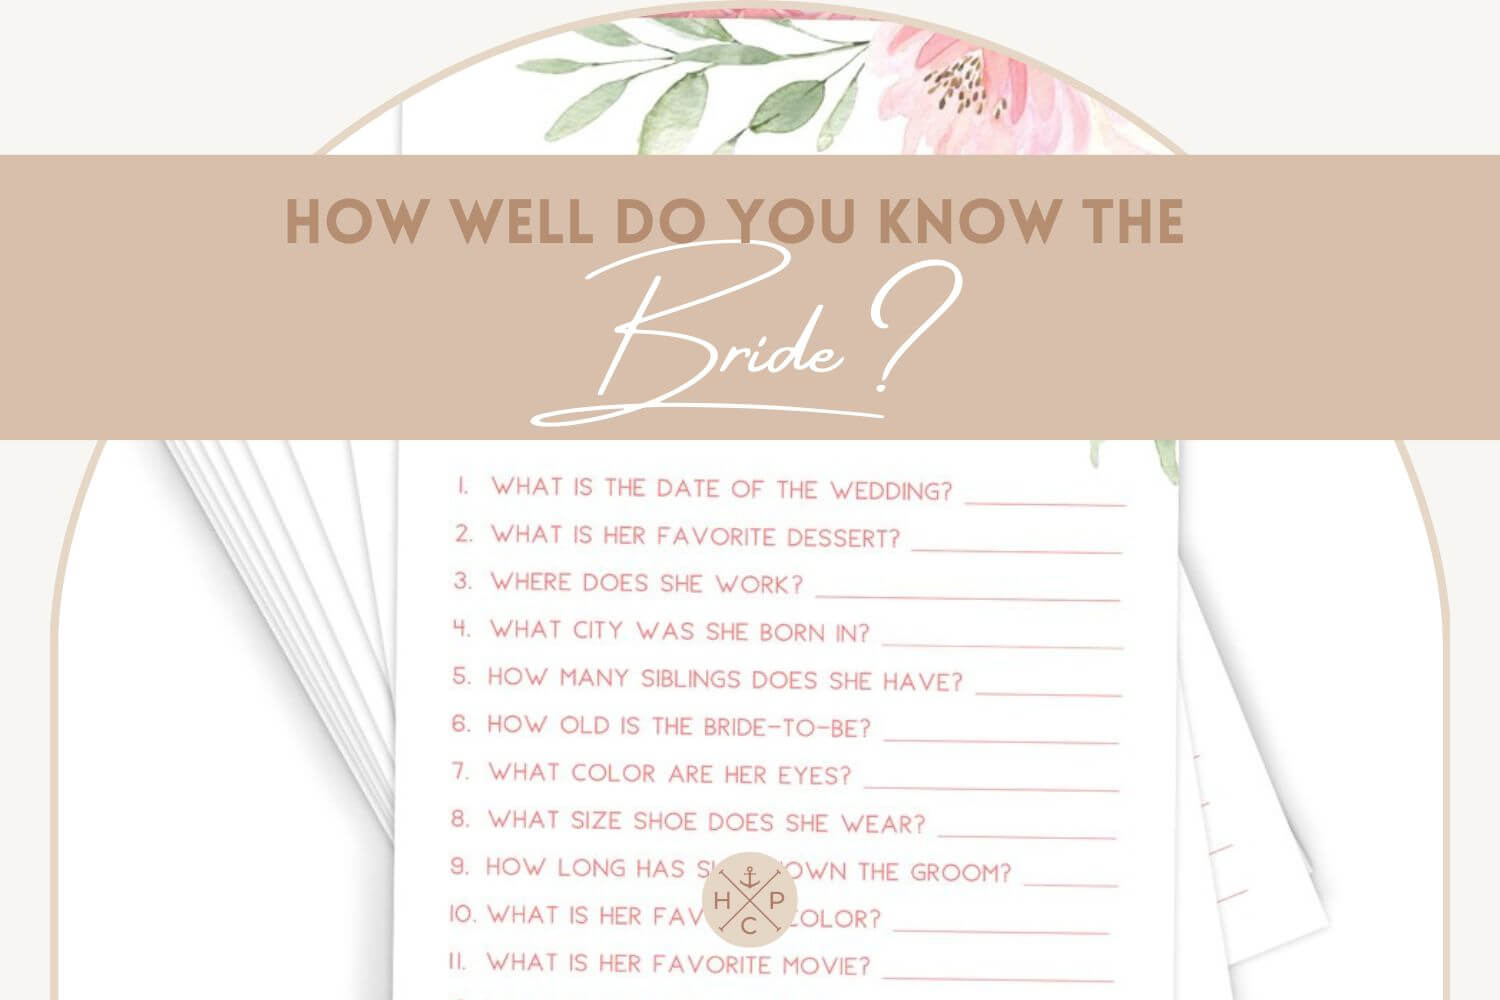 How Well Do You Know The Bride